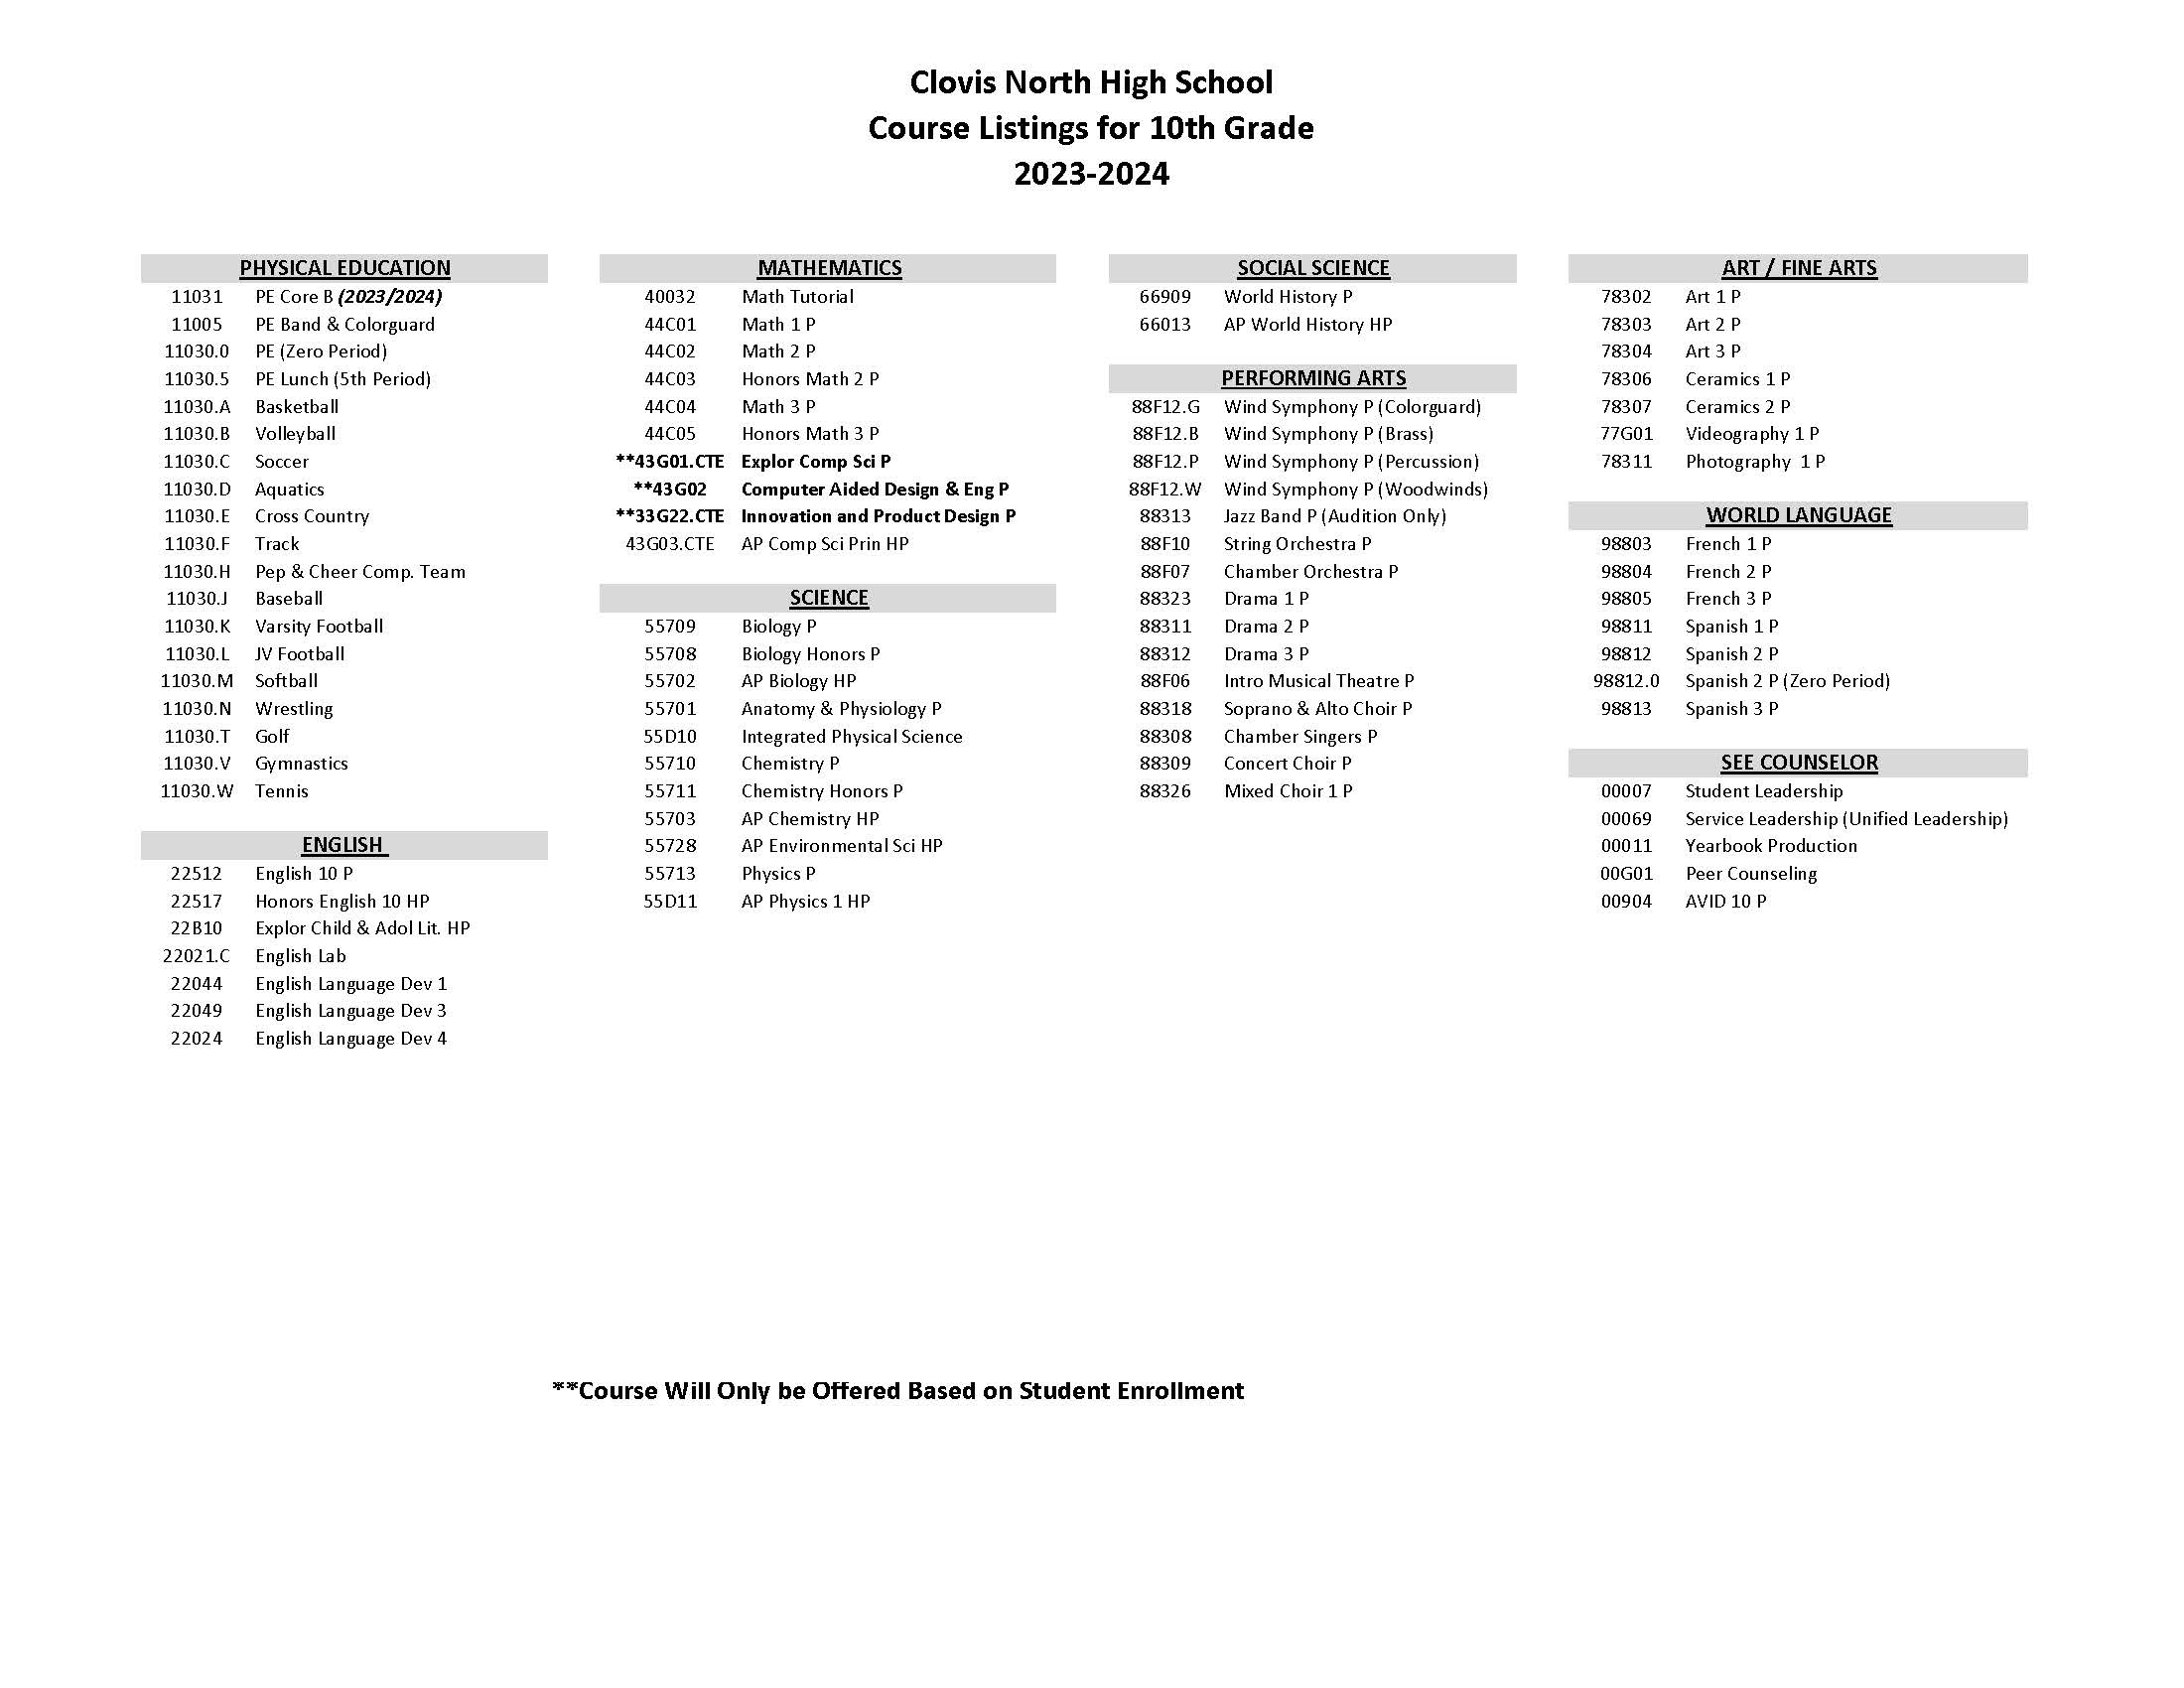 course offerings 10th grade